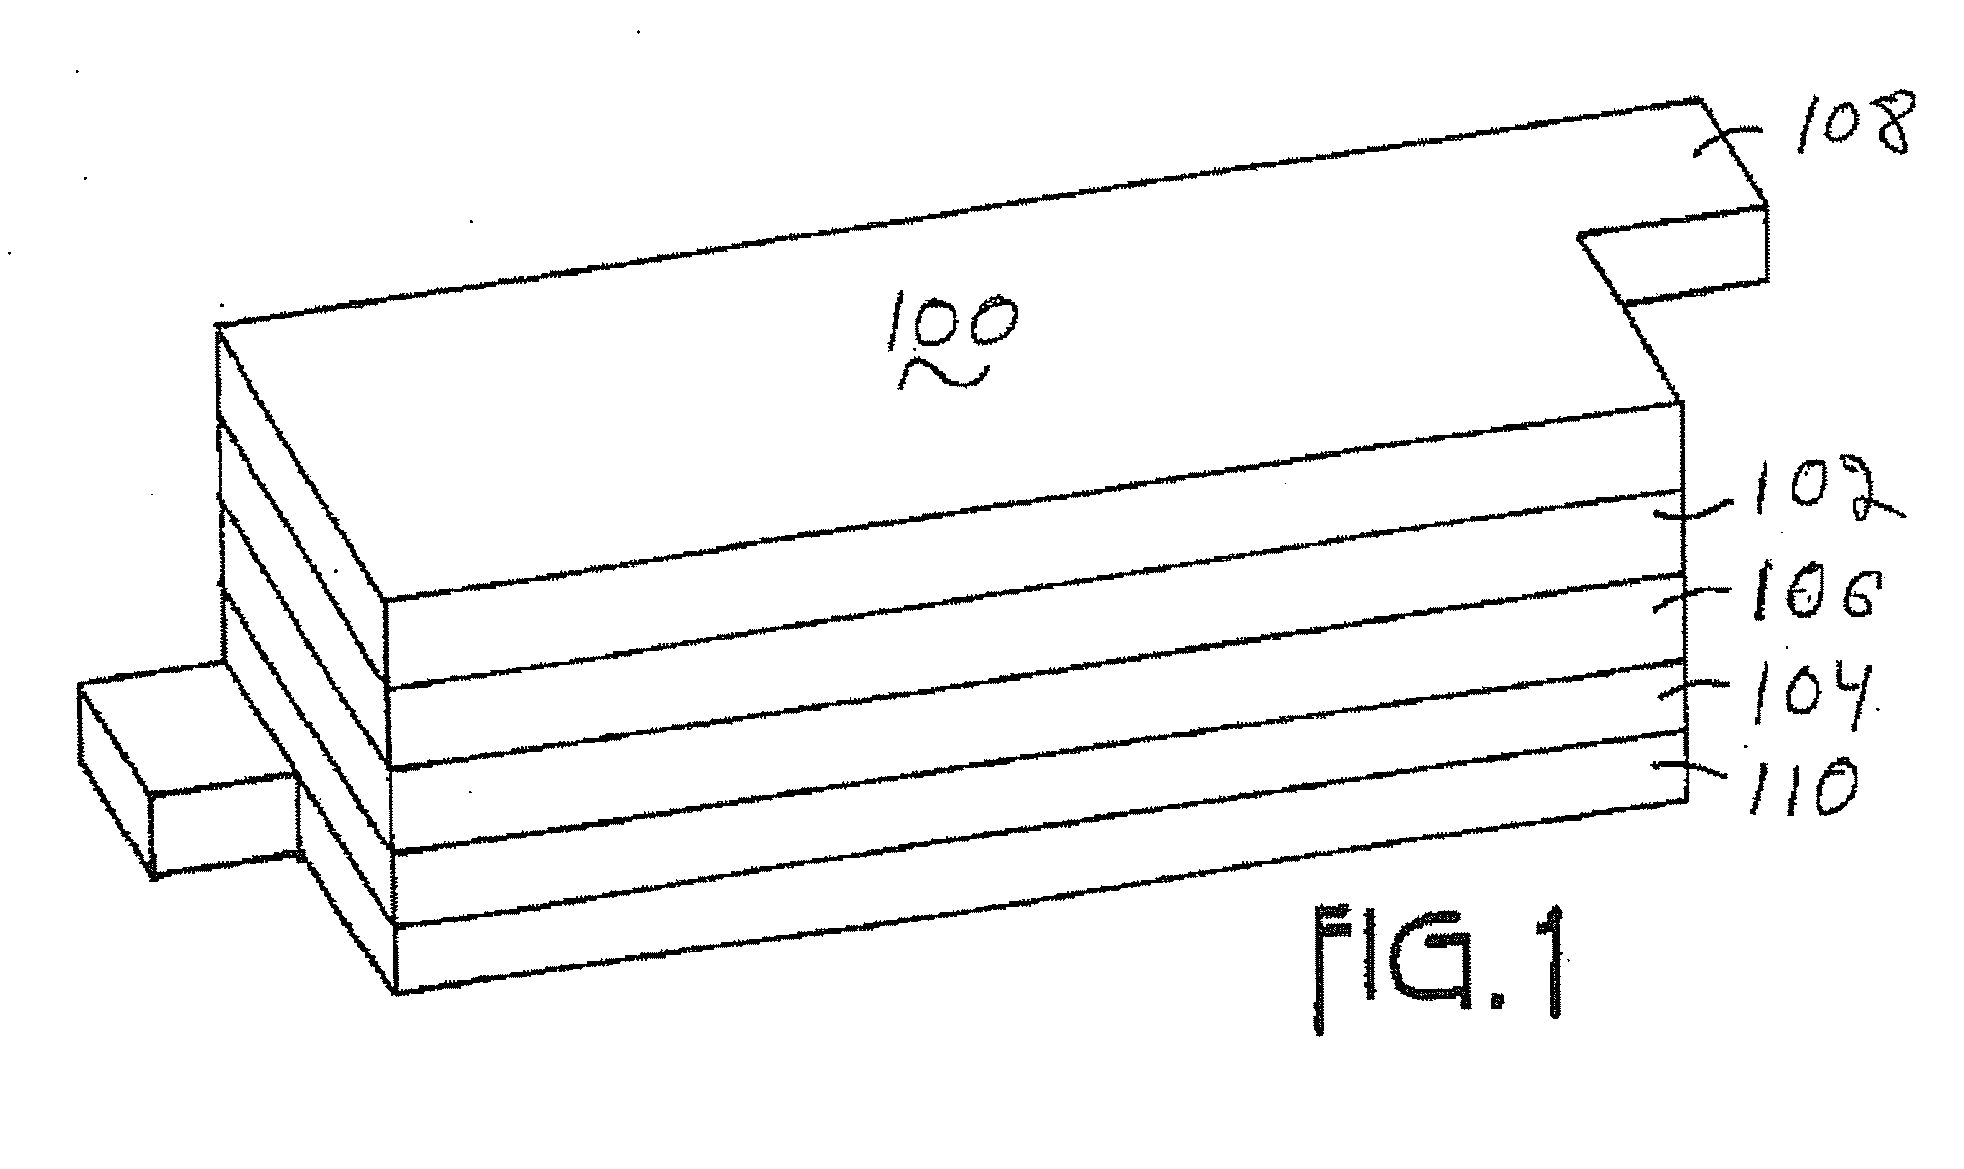 Positive electrode materials for lithium ion batteries having a high specific discharge capacity and processes for the synthesis of these materials